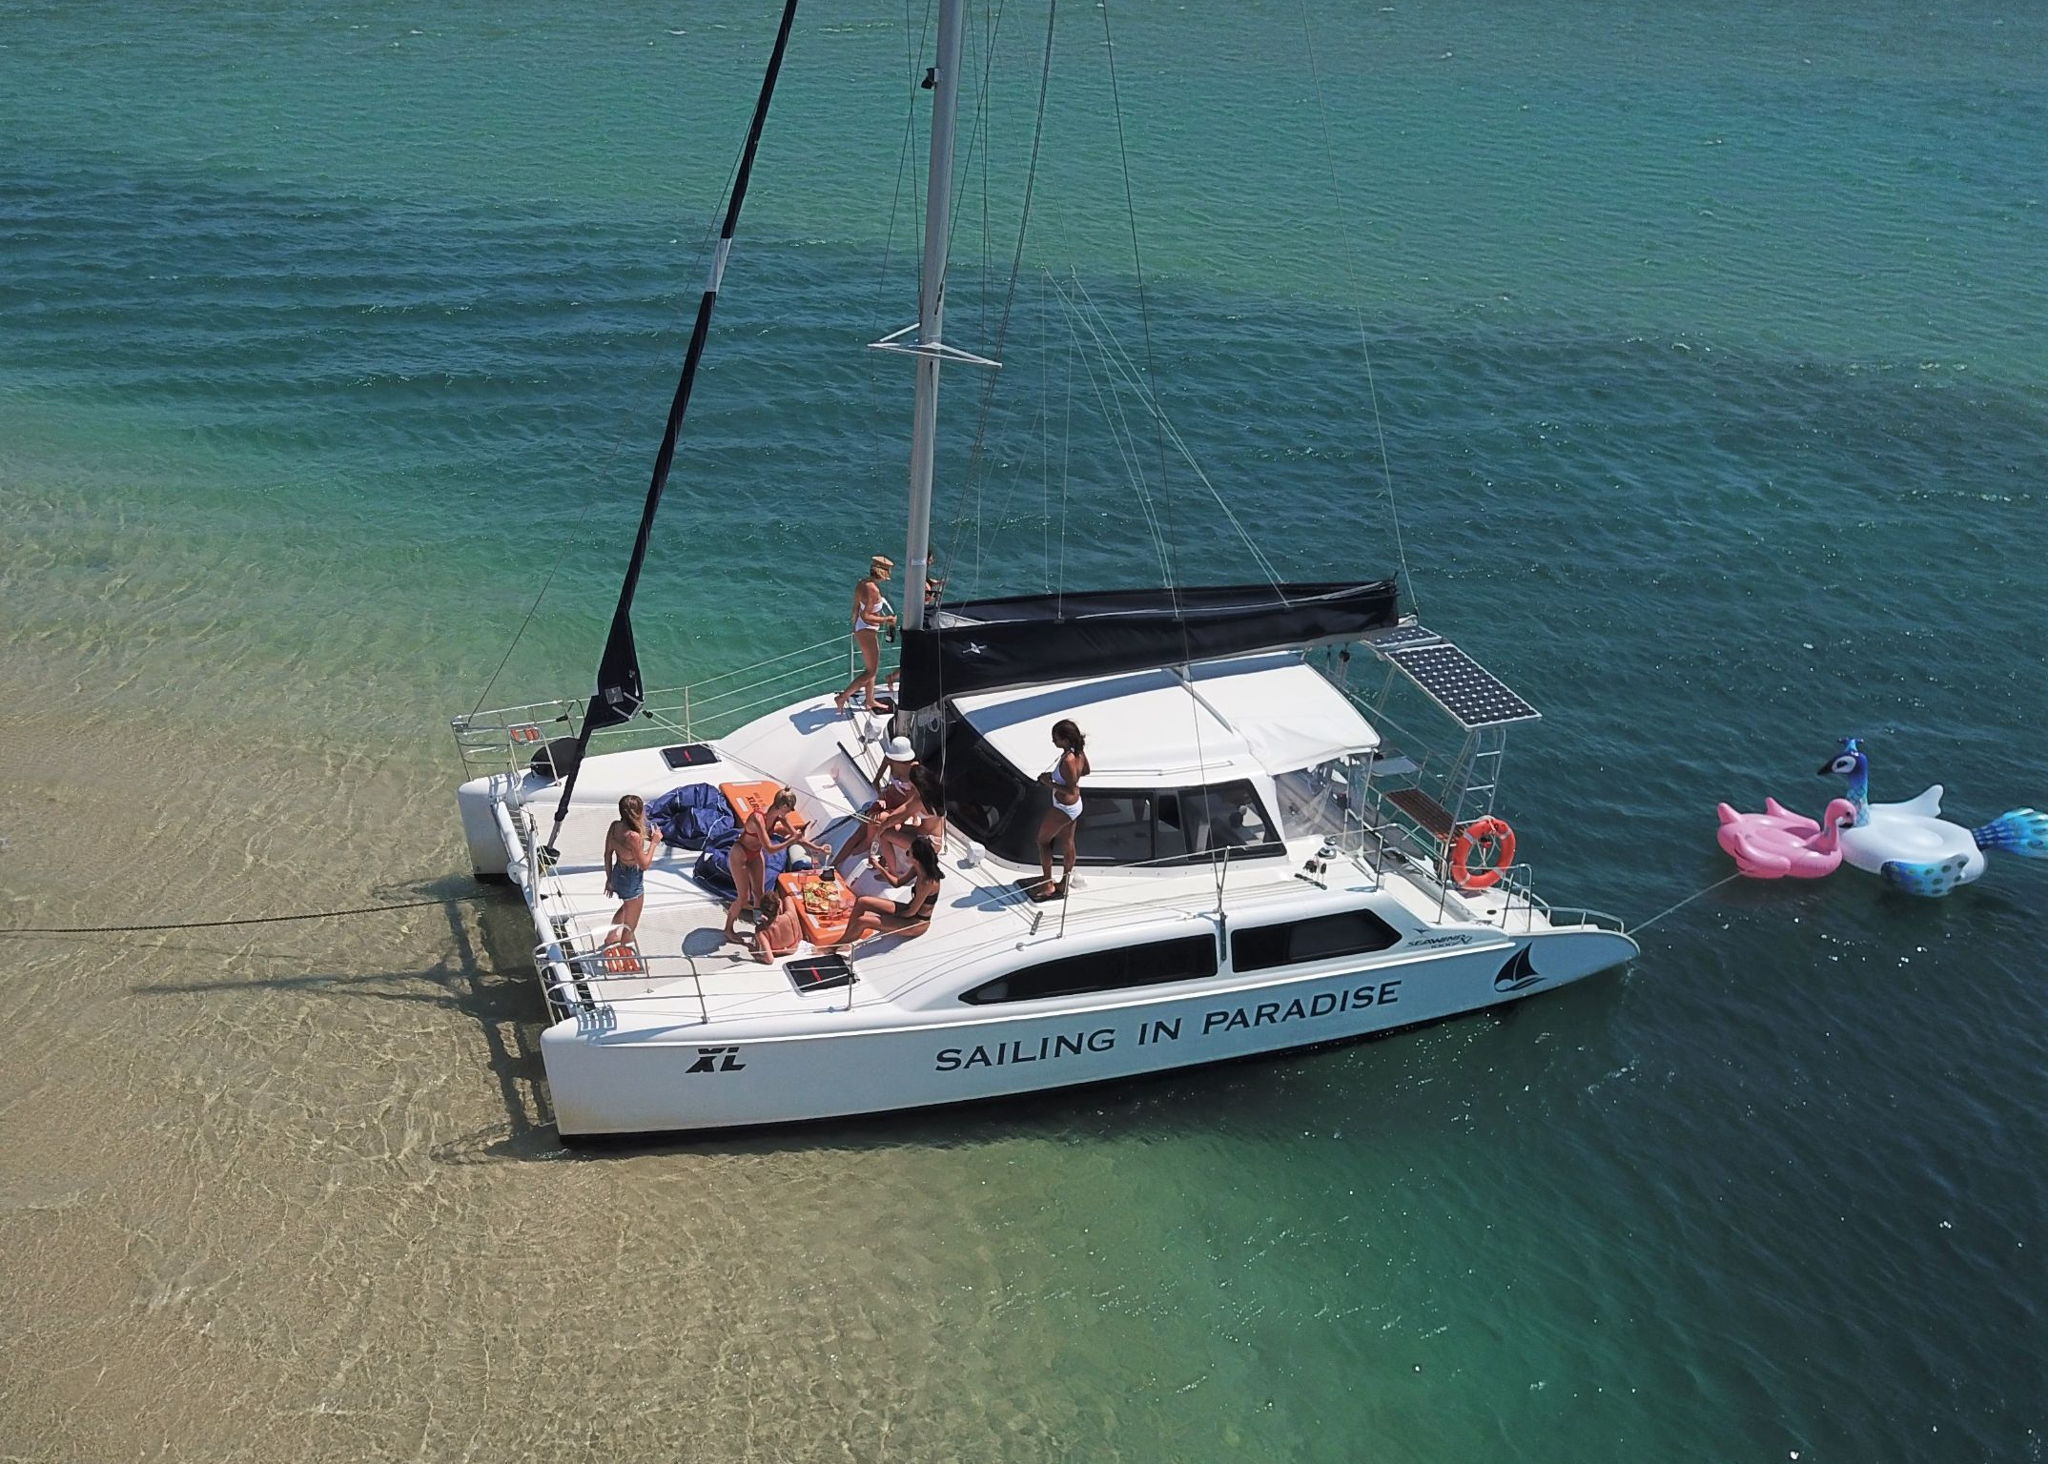 Seawind 1000XL beach landing at Wave Break Island, surrounded by crystal clear waters of the Gold Coat Broadwater